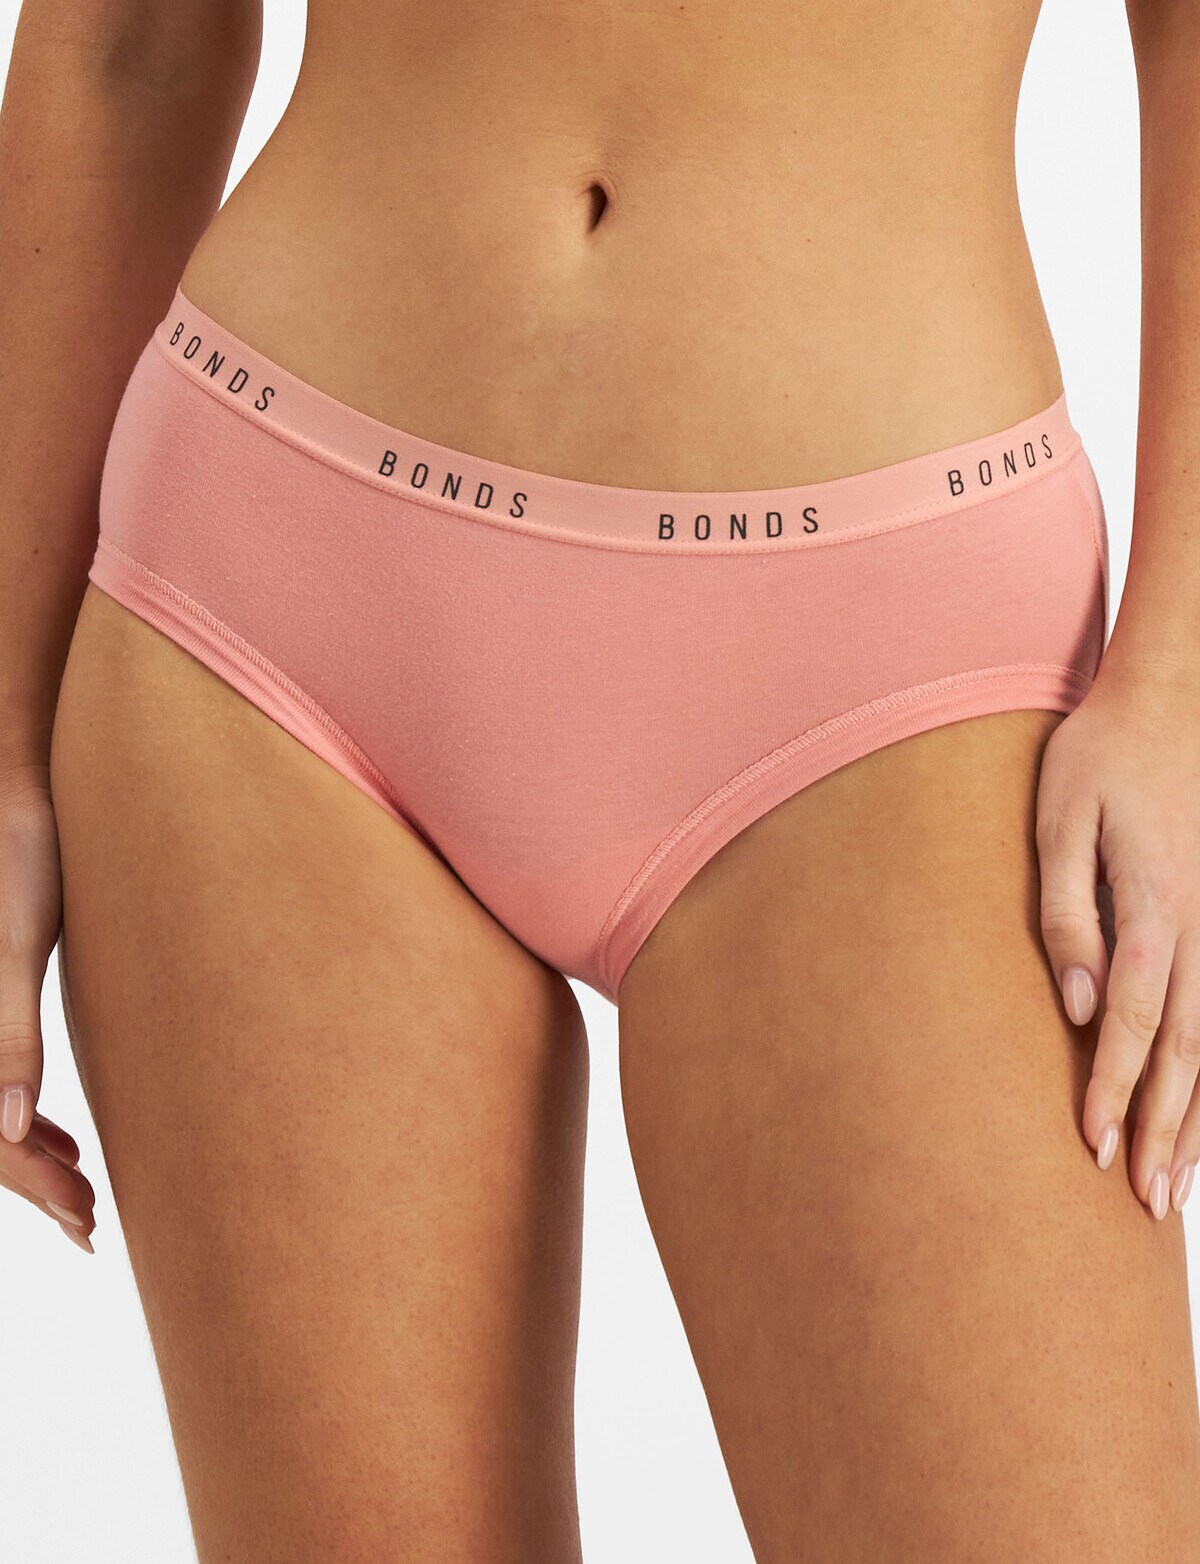 Bonds Cottontails Midi Brief, 3-Pack, Red, Pink, & Striped